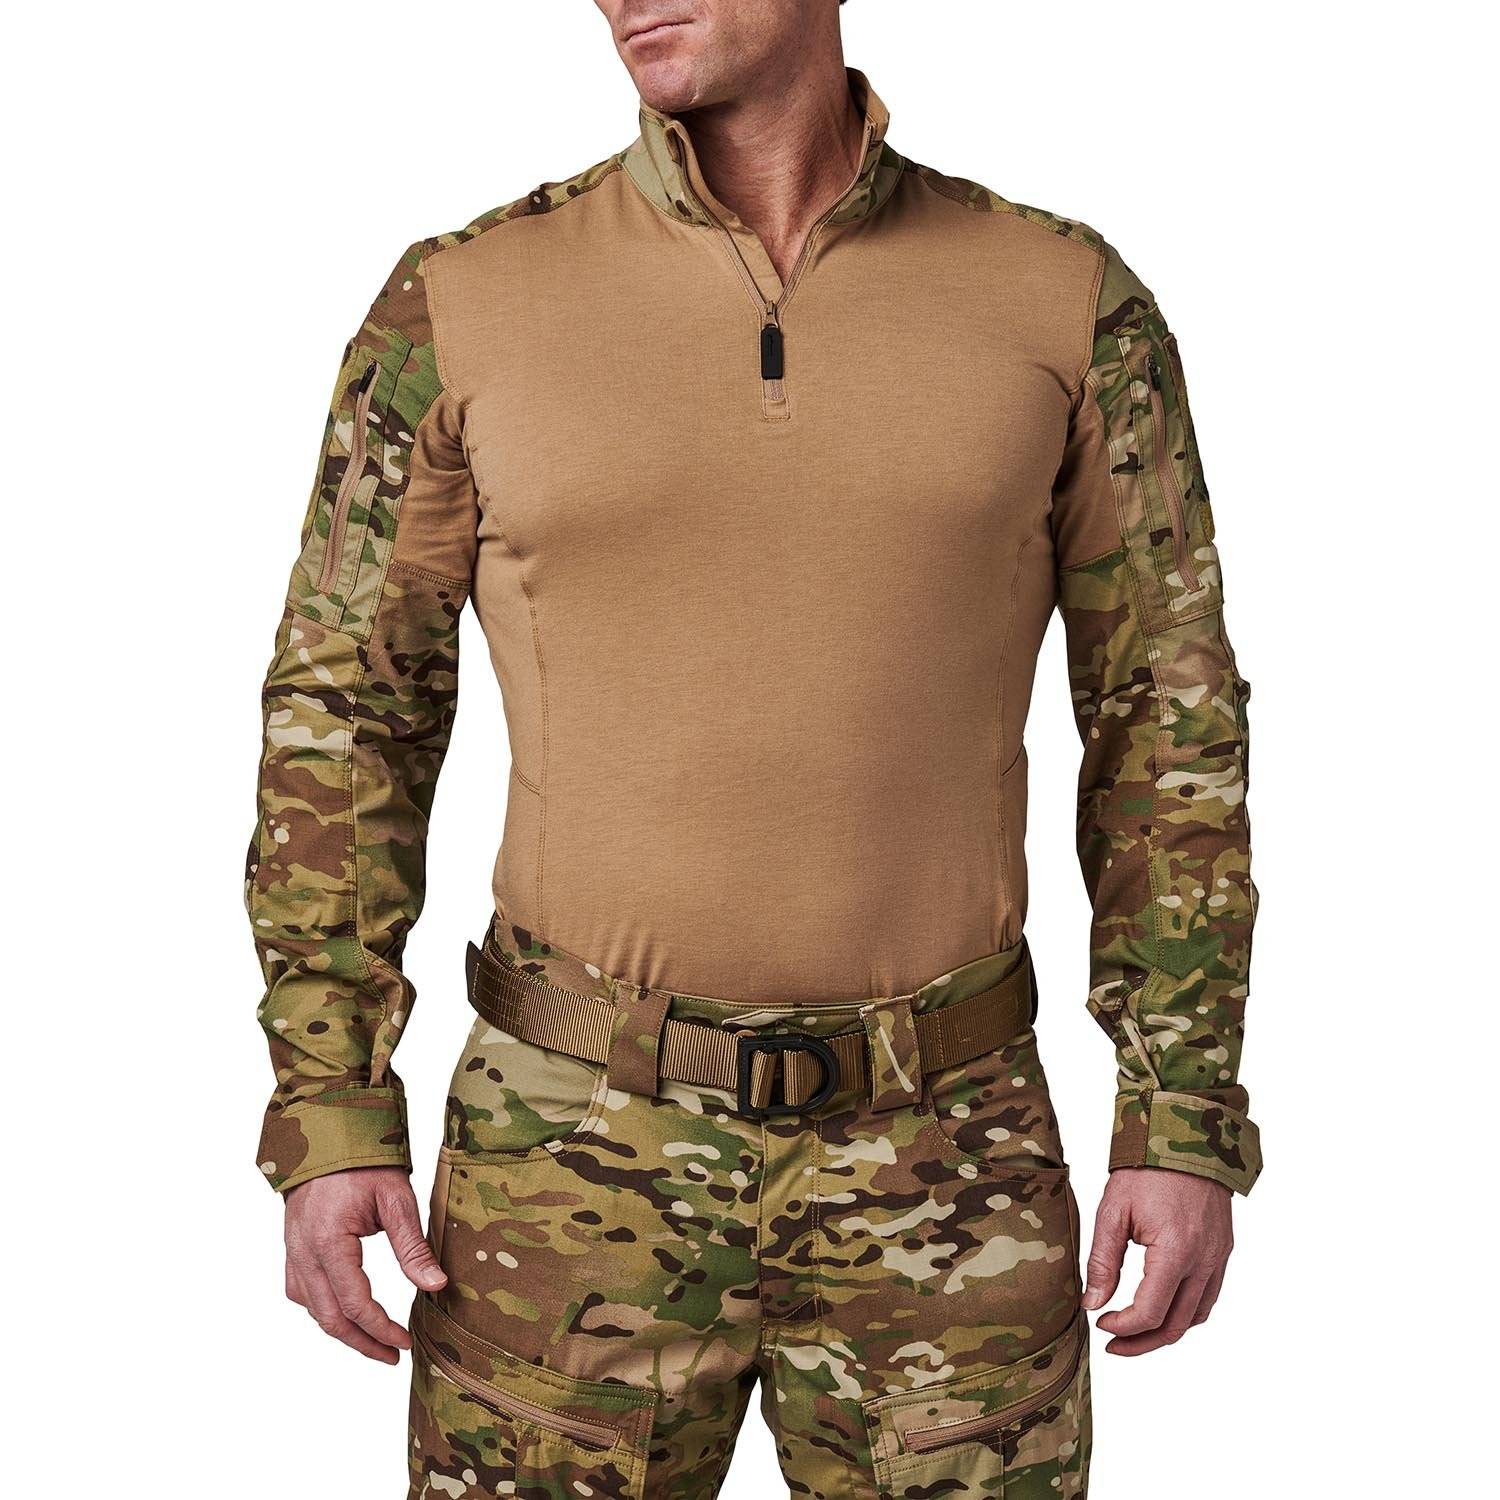 Clothing & Apparel for Public Safety, Safety Clothing